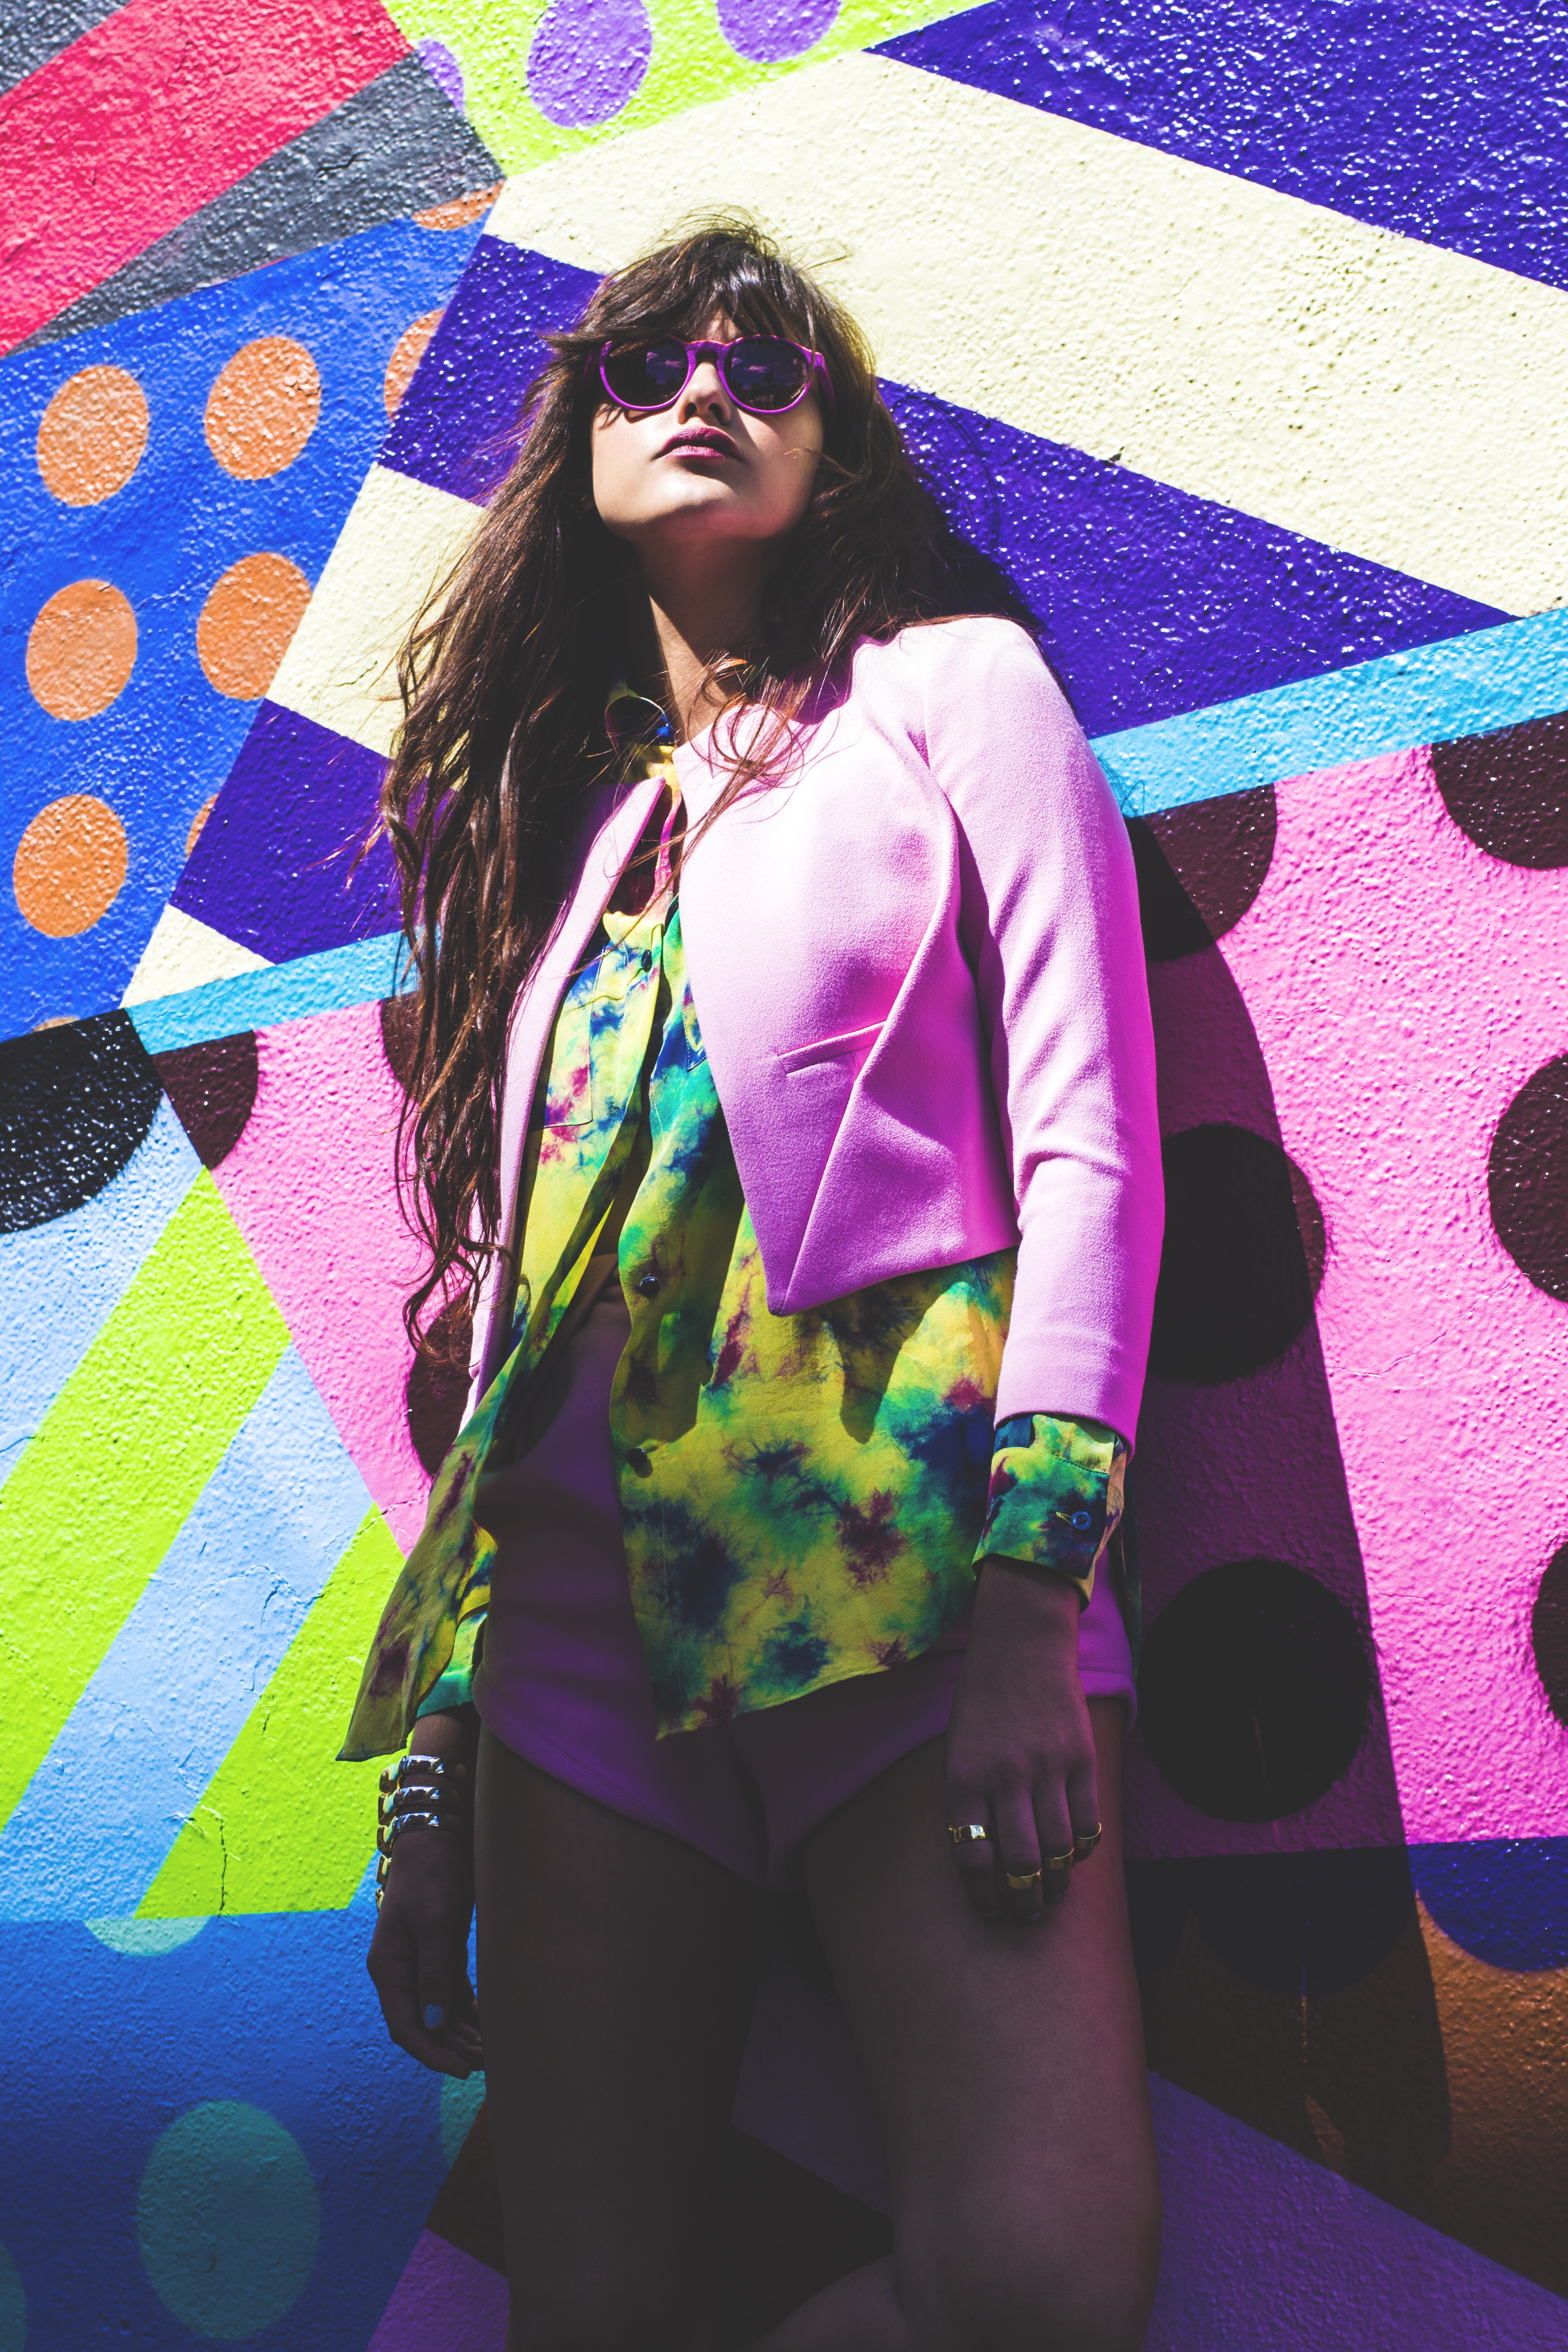 tie dye print silk blouse HOUSE OF HOLLAND. pale pink crepe blazer and matching shorts BALENCIAGA. silver and gold skeleton cuff NOIR. five-finger gold ring set EDDIE BORGO. pink and purple acetate sunglasses VINTAGE. earrings model's own.